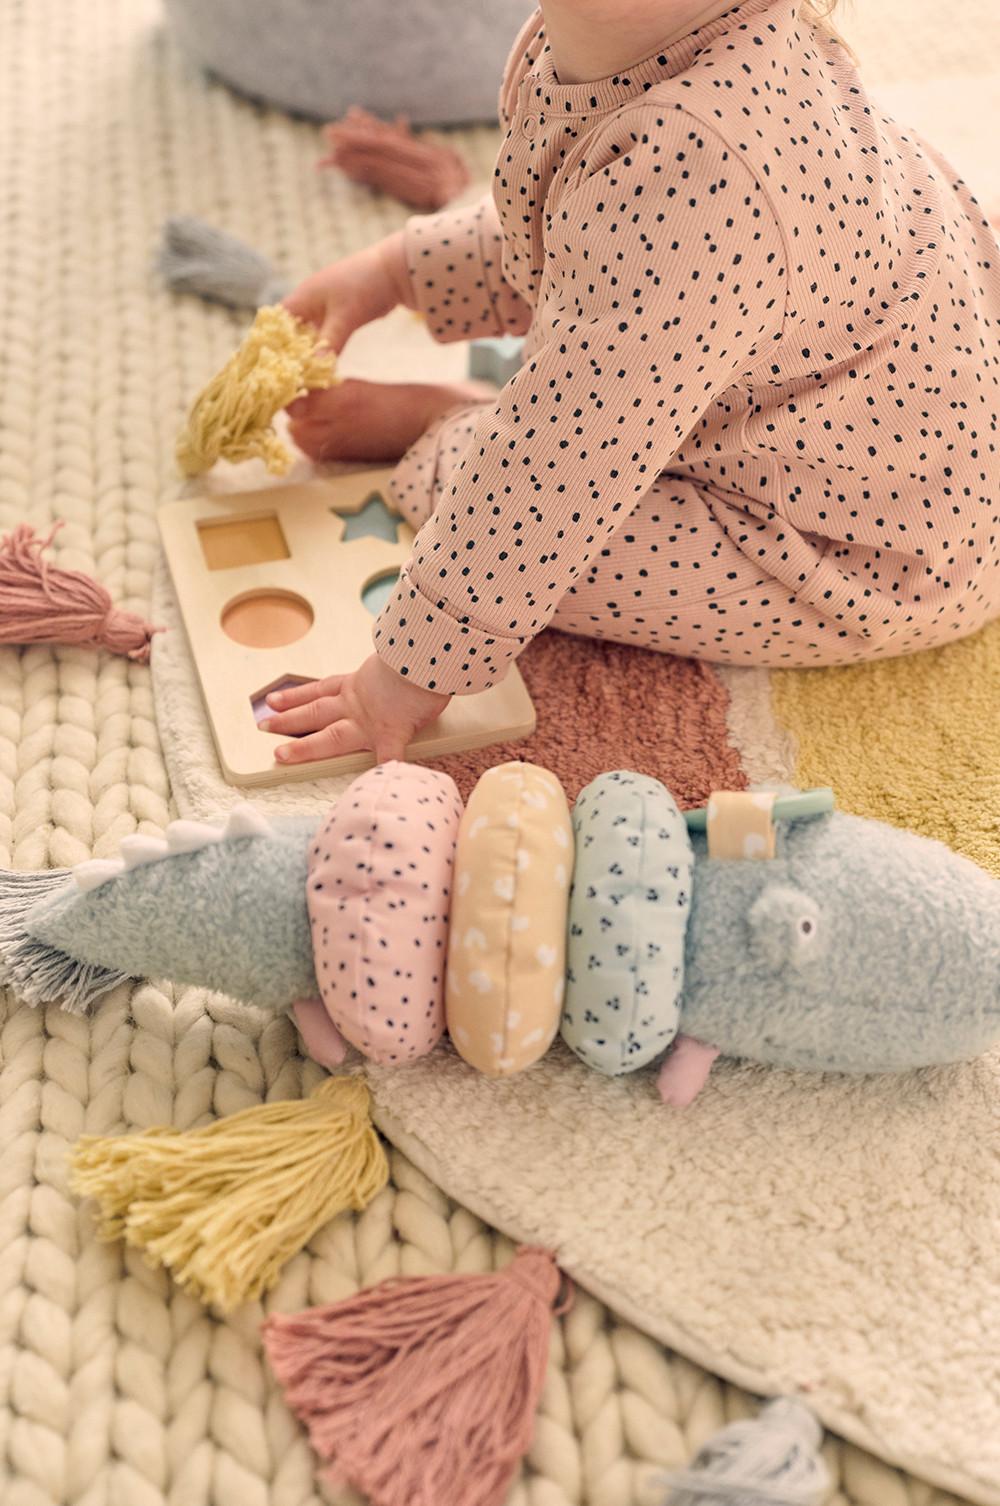 Baby on floor with toys